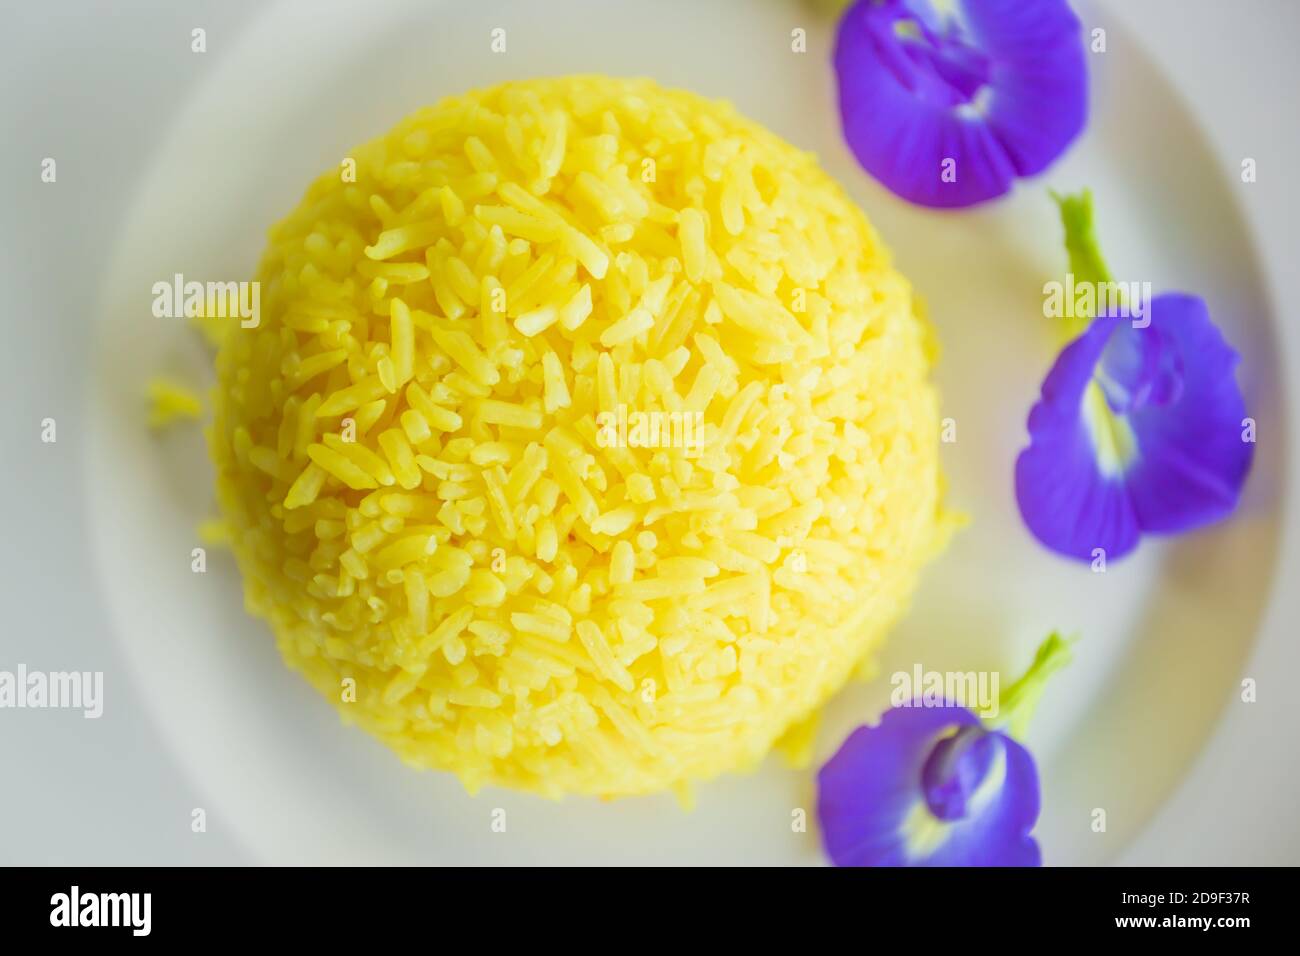 Turmeric Rice with Butterfly pea flowers on white plate, tasty yellow steamed rice with purple flowers on white plate. Flat lay. Top view. Close-up. Stock Photo